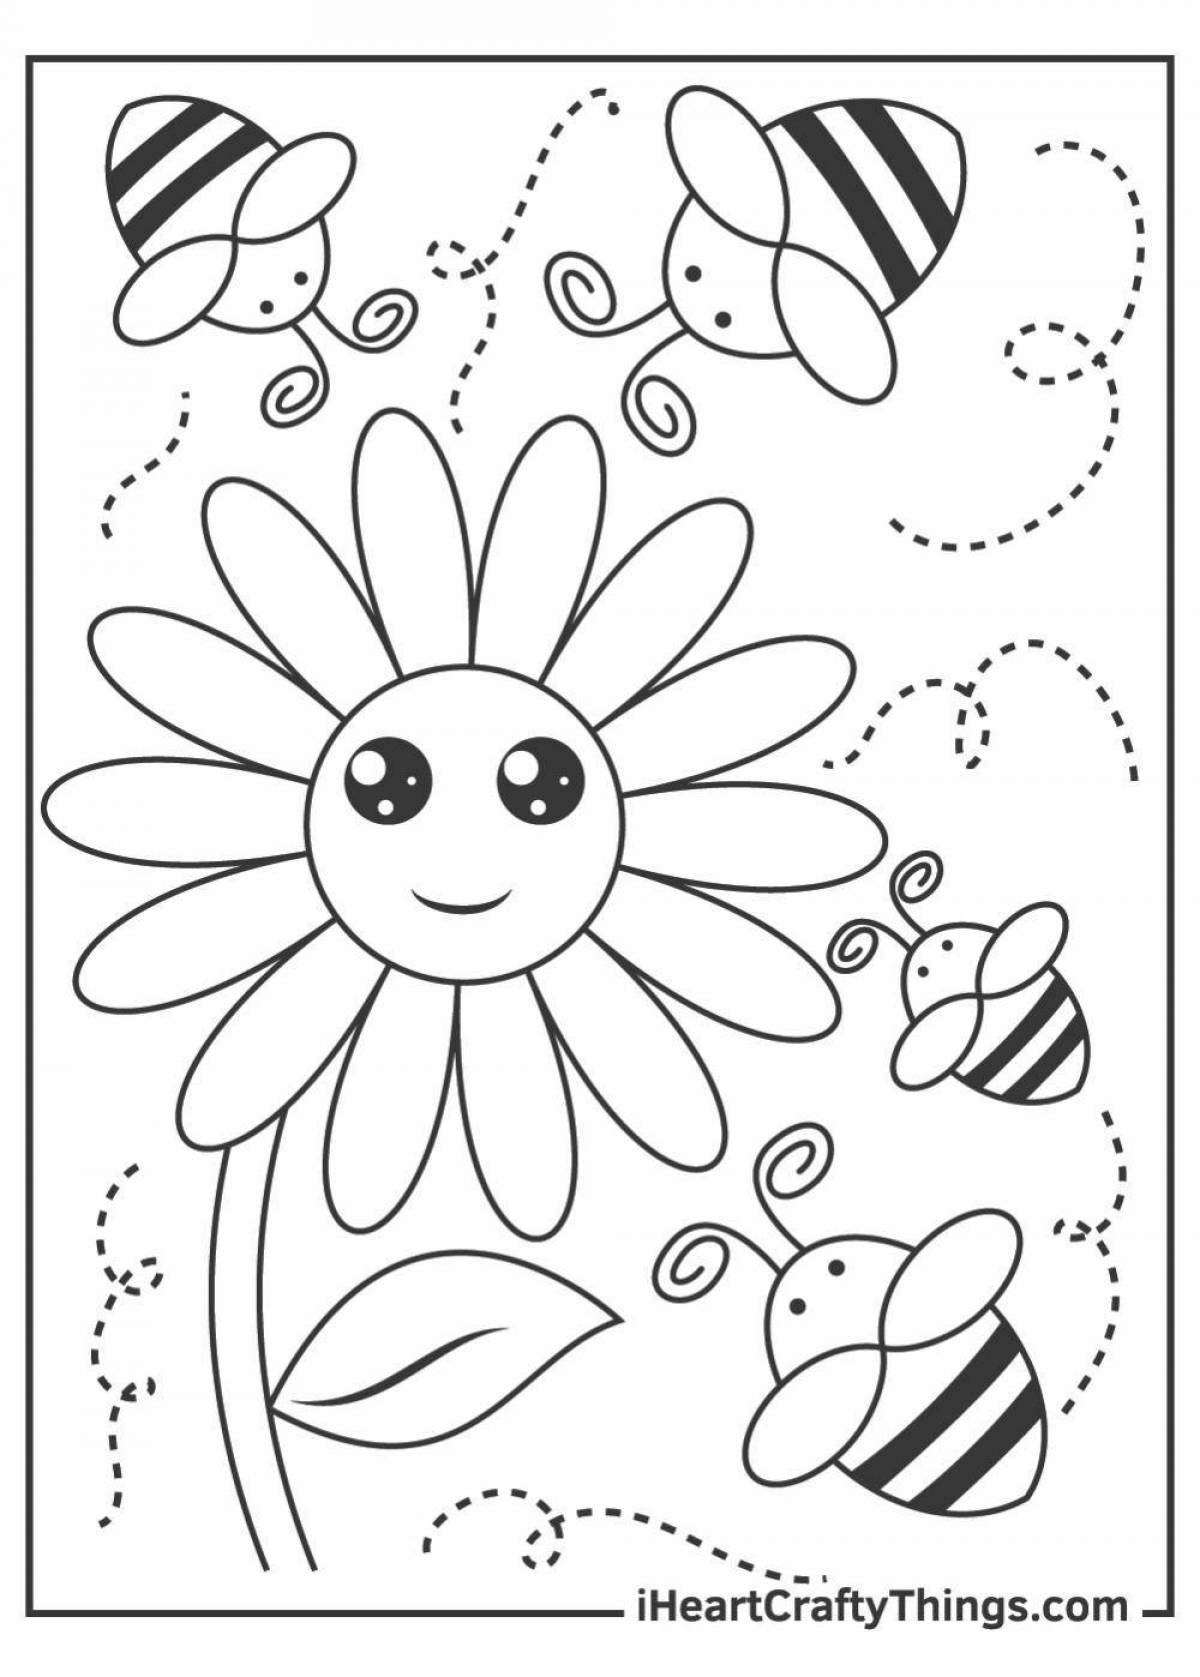 Exquisite bee coloring book for 6-7 year olds